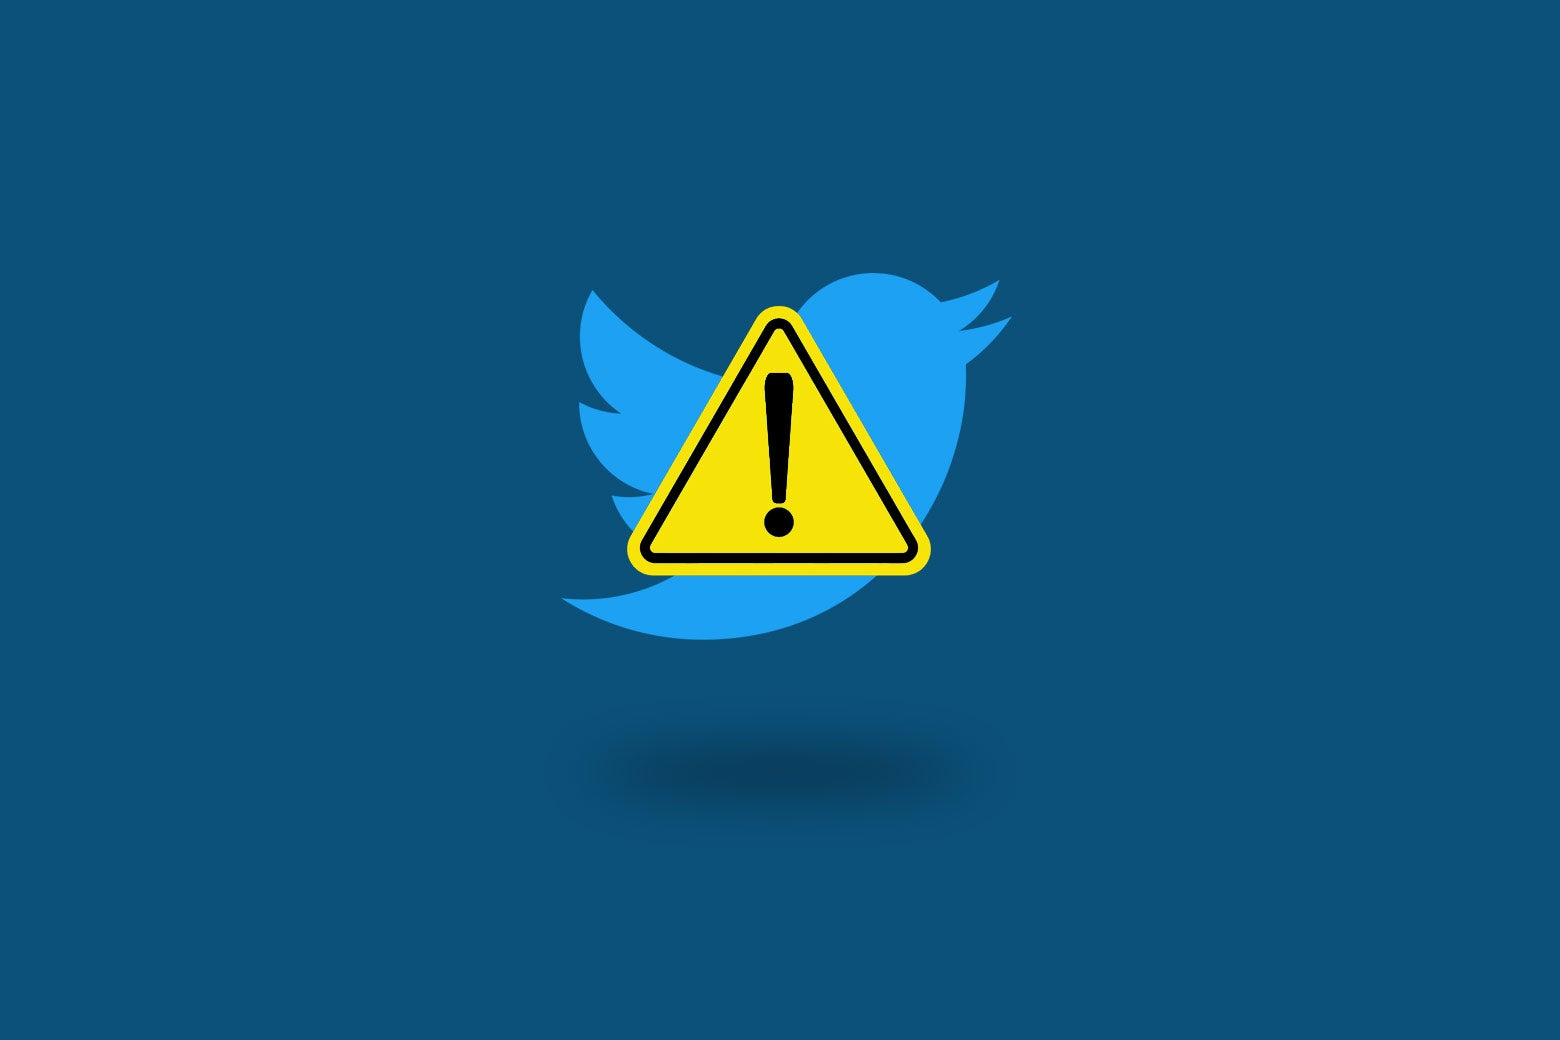 A Twitter bird with a Critical Warning symbol over it (an exclamation point in a rounded yellow triangle).